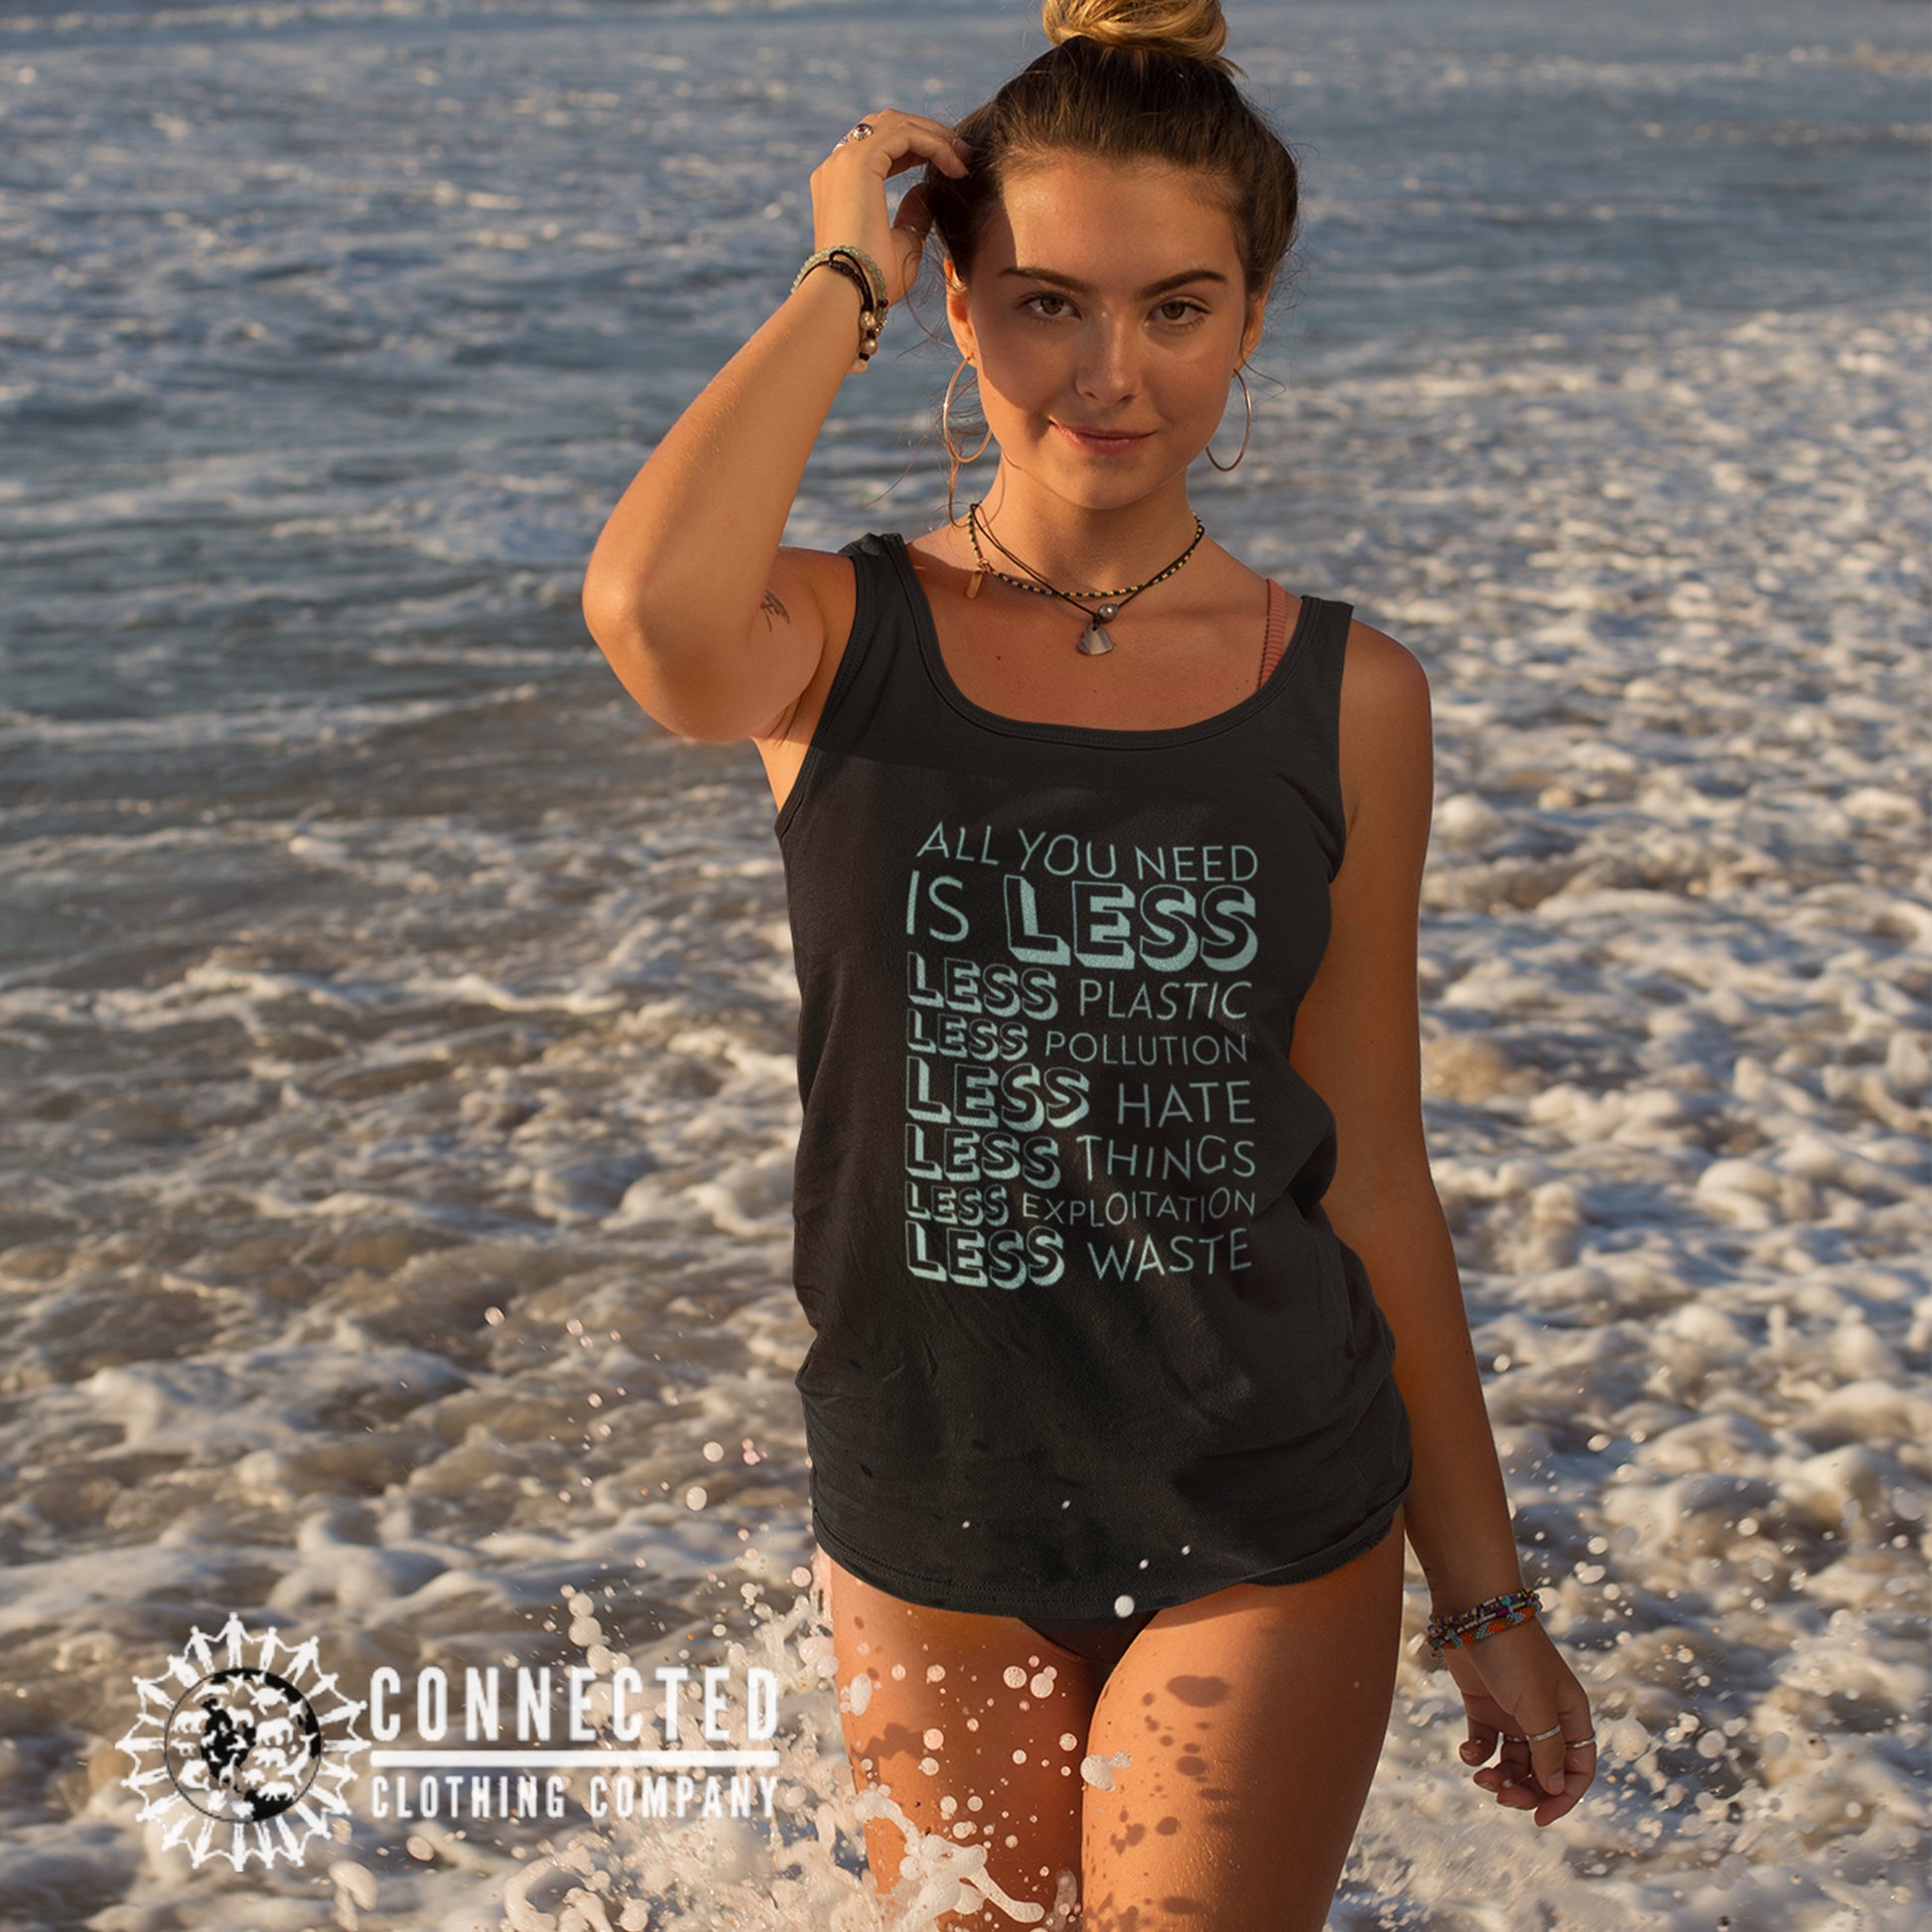 Model Wearing Black All You Need Is Less Women's Tank Top - Connected Clothing Company - 10% of profits donated to Mission Blue ocean conservation